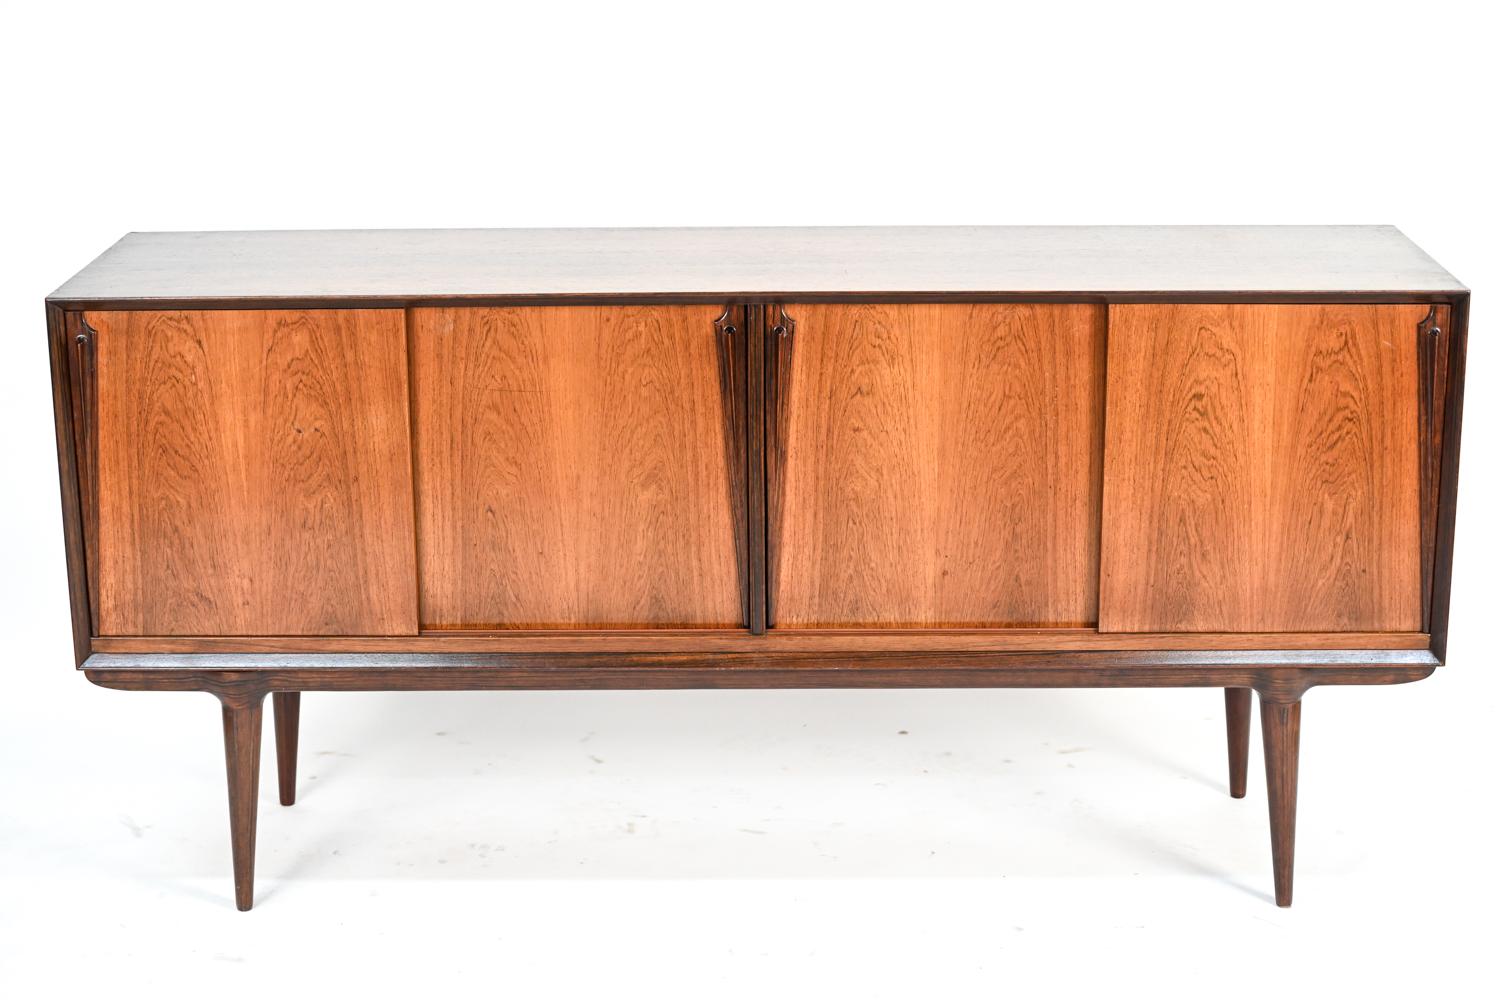 A Danish mid-century rosewood sideboard by Omann Jun, retaining remnants of label on back.